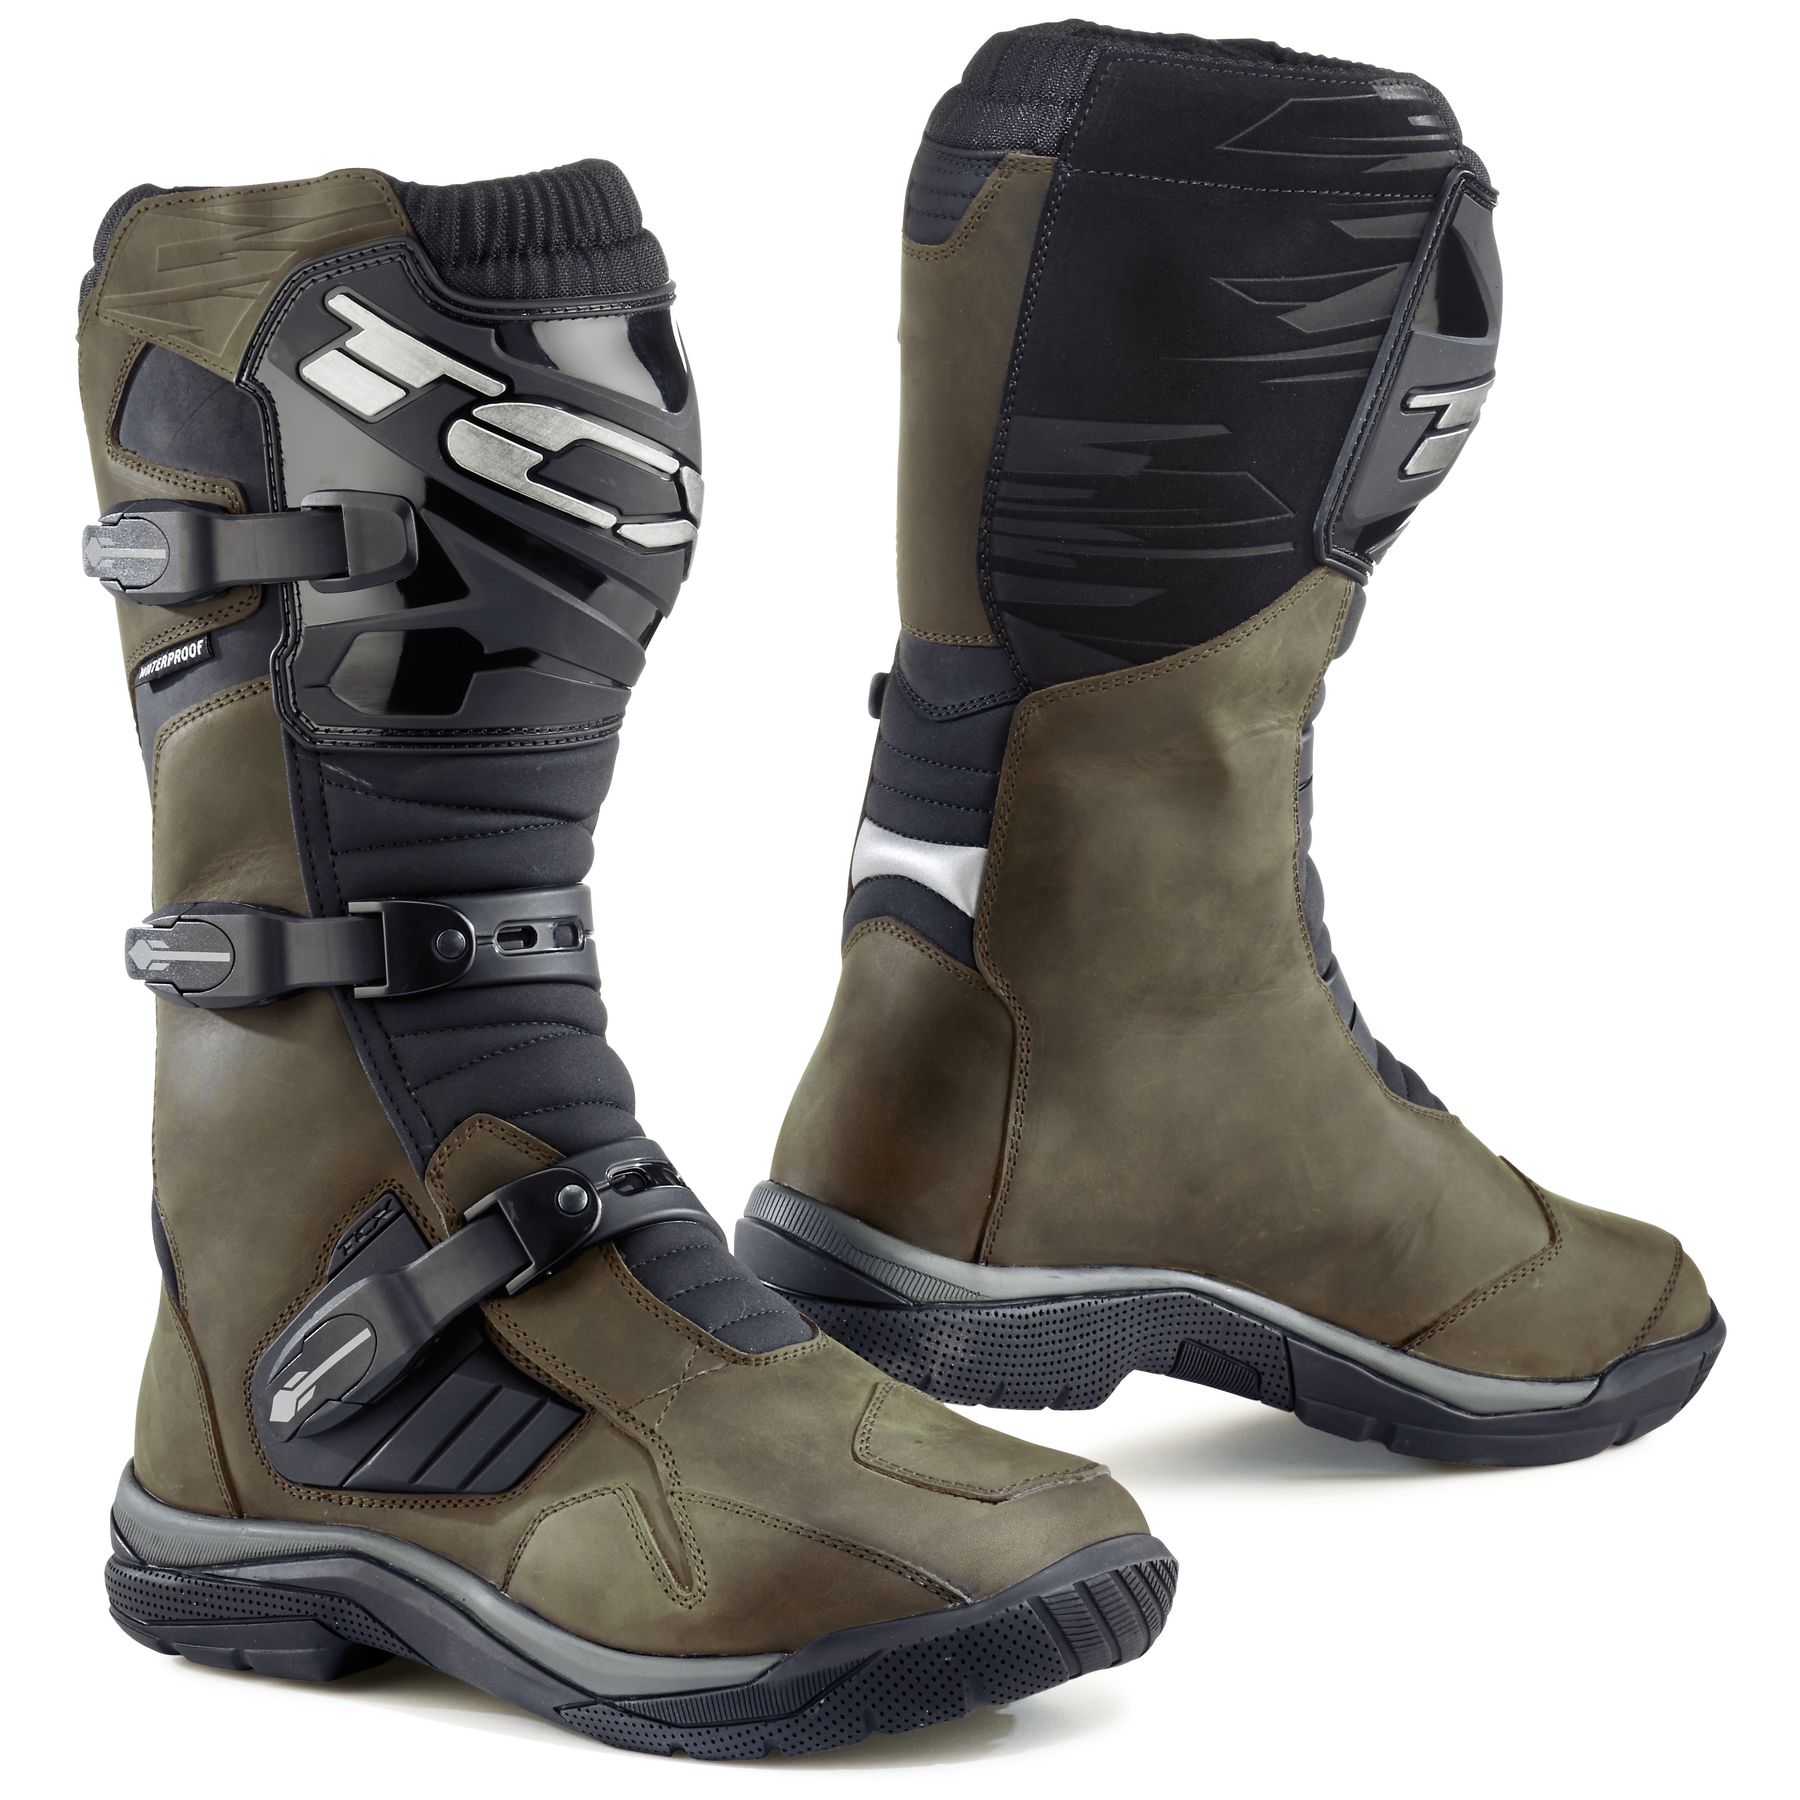 TCX Baja WP Boots Buy Online with Free Shipping – superbikestore